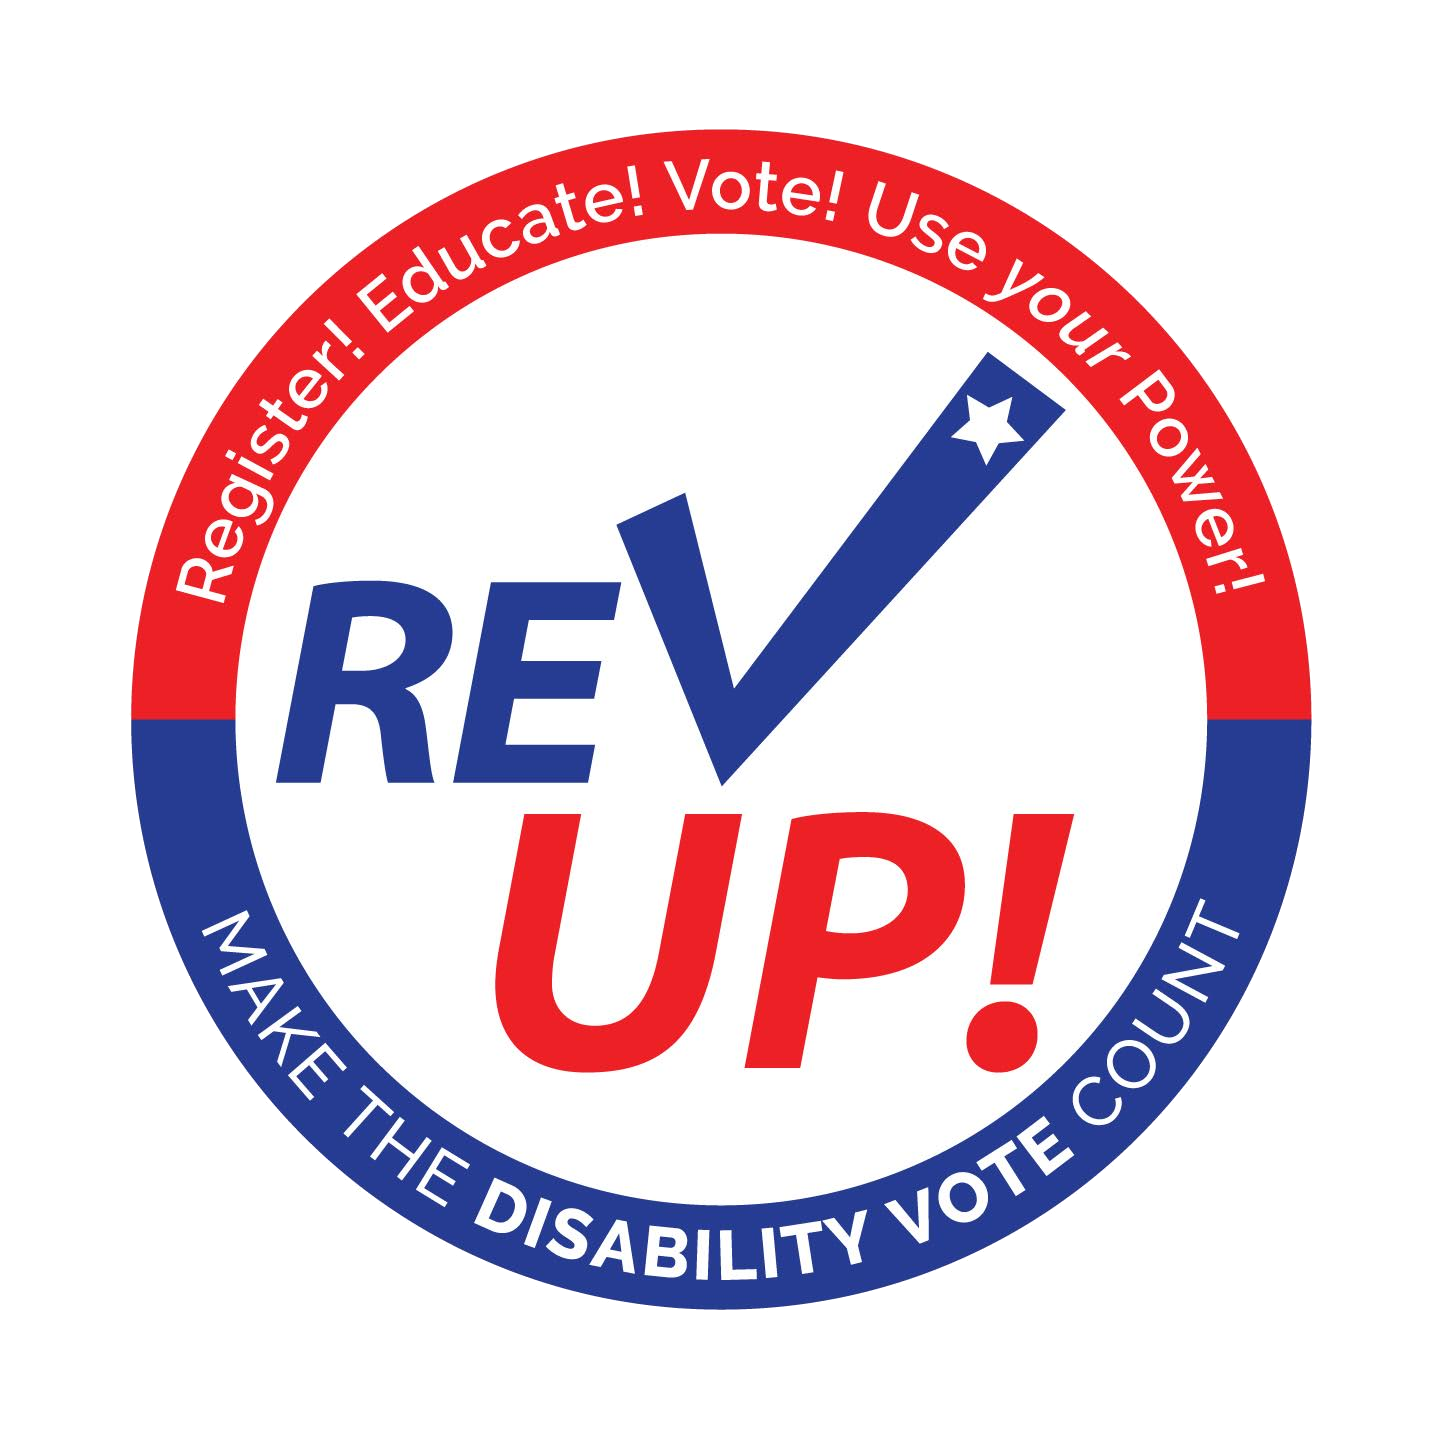 REV UP! Make the Disability Vote Count